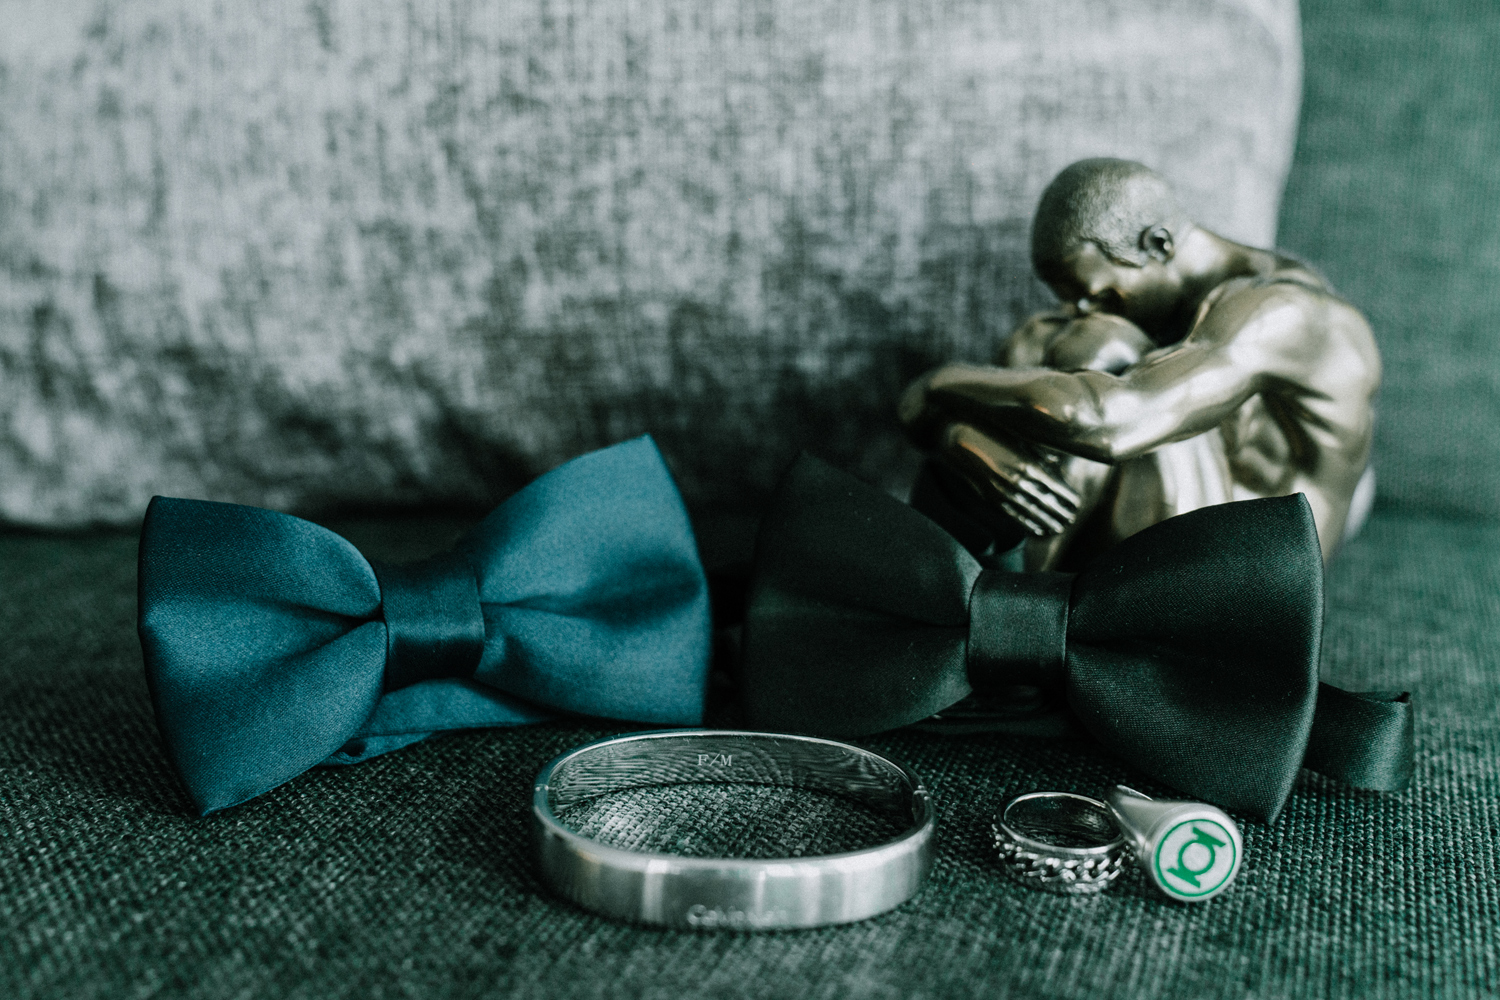 Gay wedding photo showing detail of bow ties and wedding rings